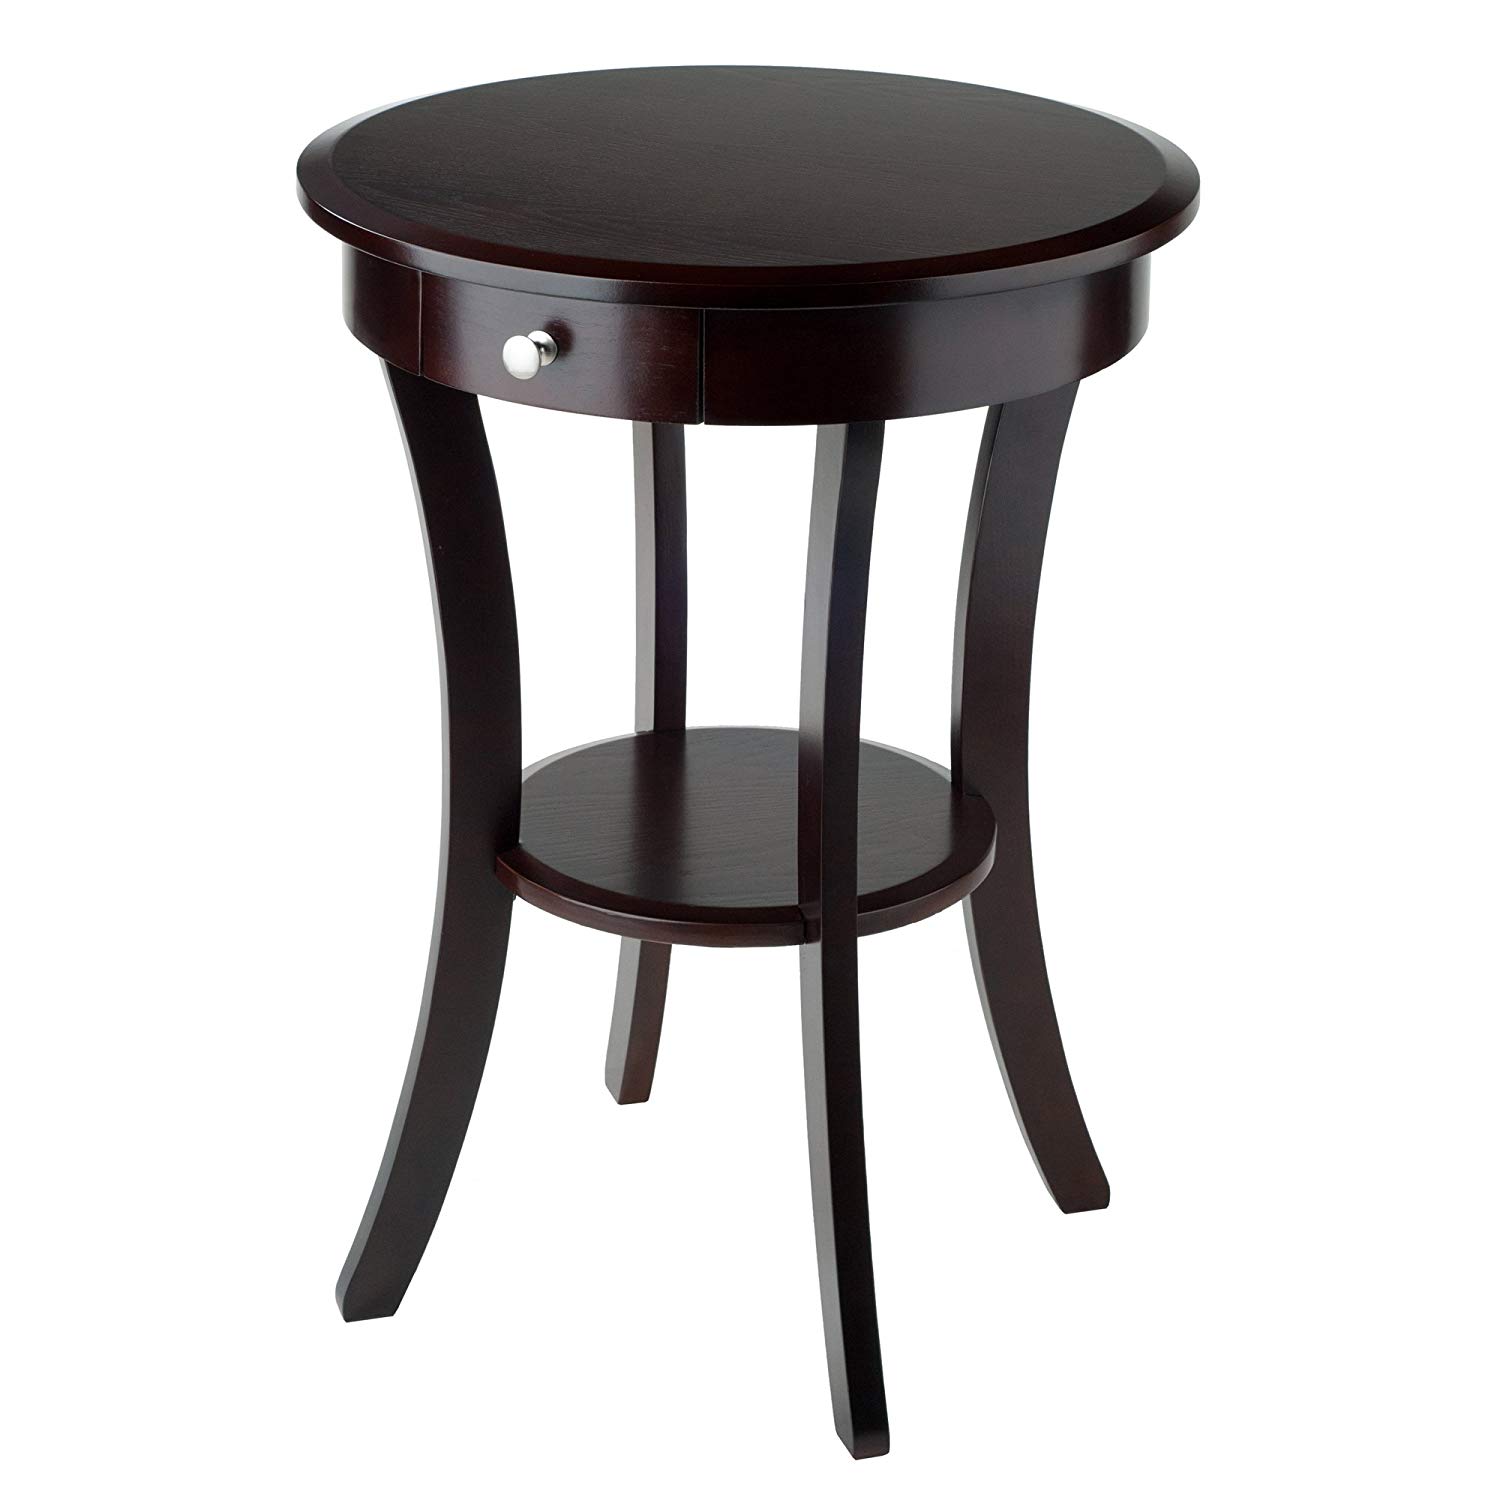 winsome wood sasha accent table cappuccino cassie round with glass kitchen dining antique nesting tables inlay metal legs ikea mats hourglass threshold chairs edmonton silver